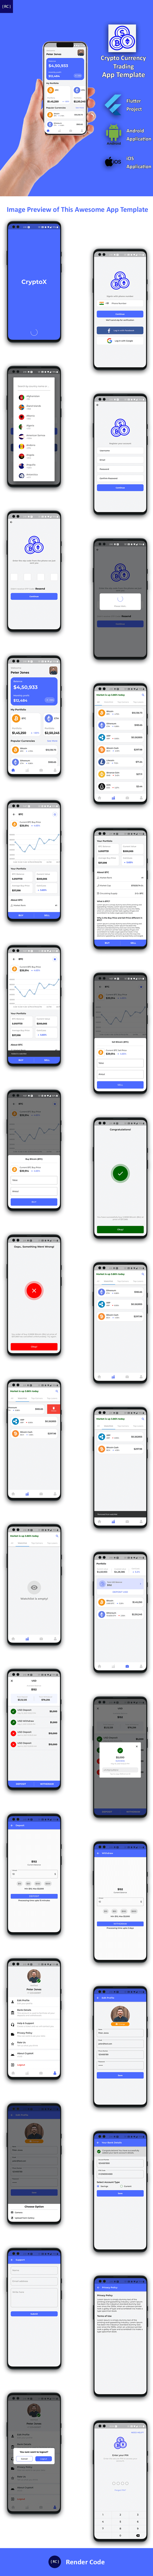 Crypto Currency Trading Android App Template + iOS App Template | Flutter 3 | CryptoX - 9